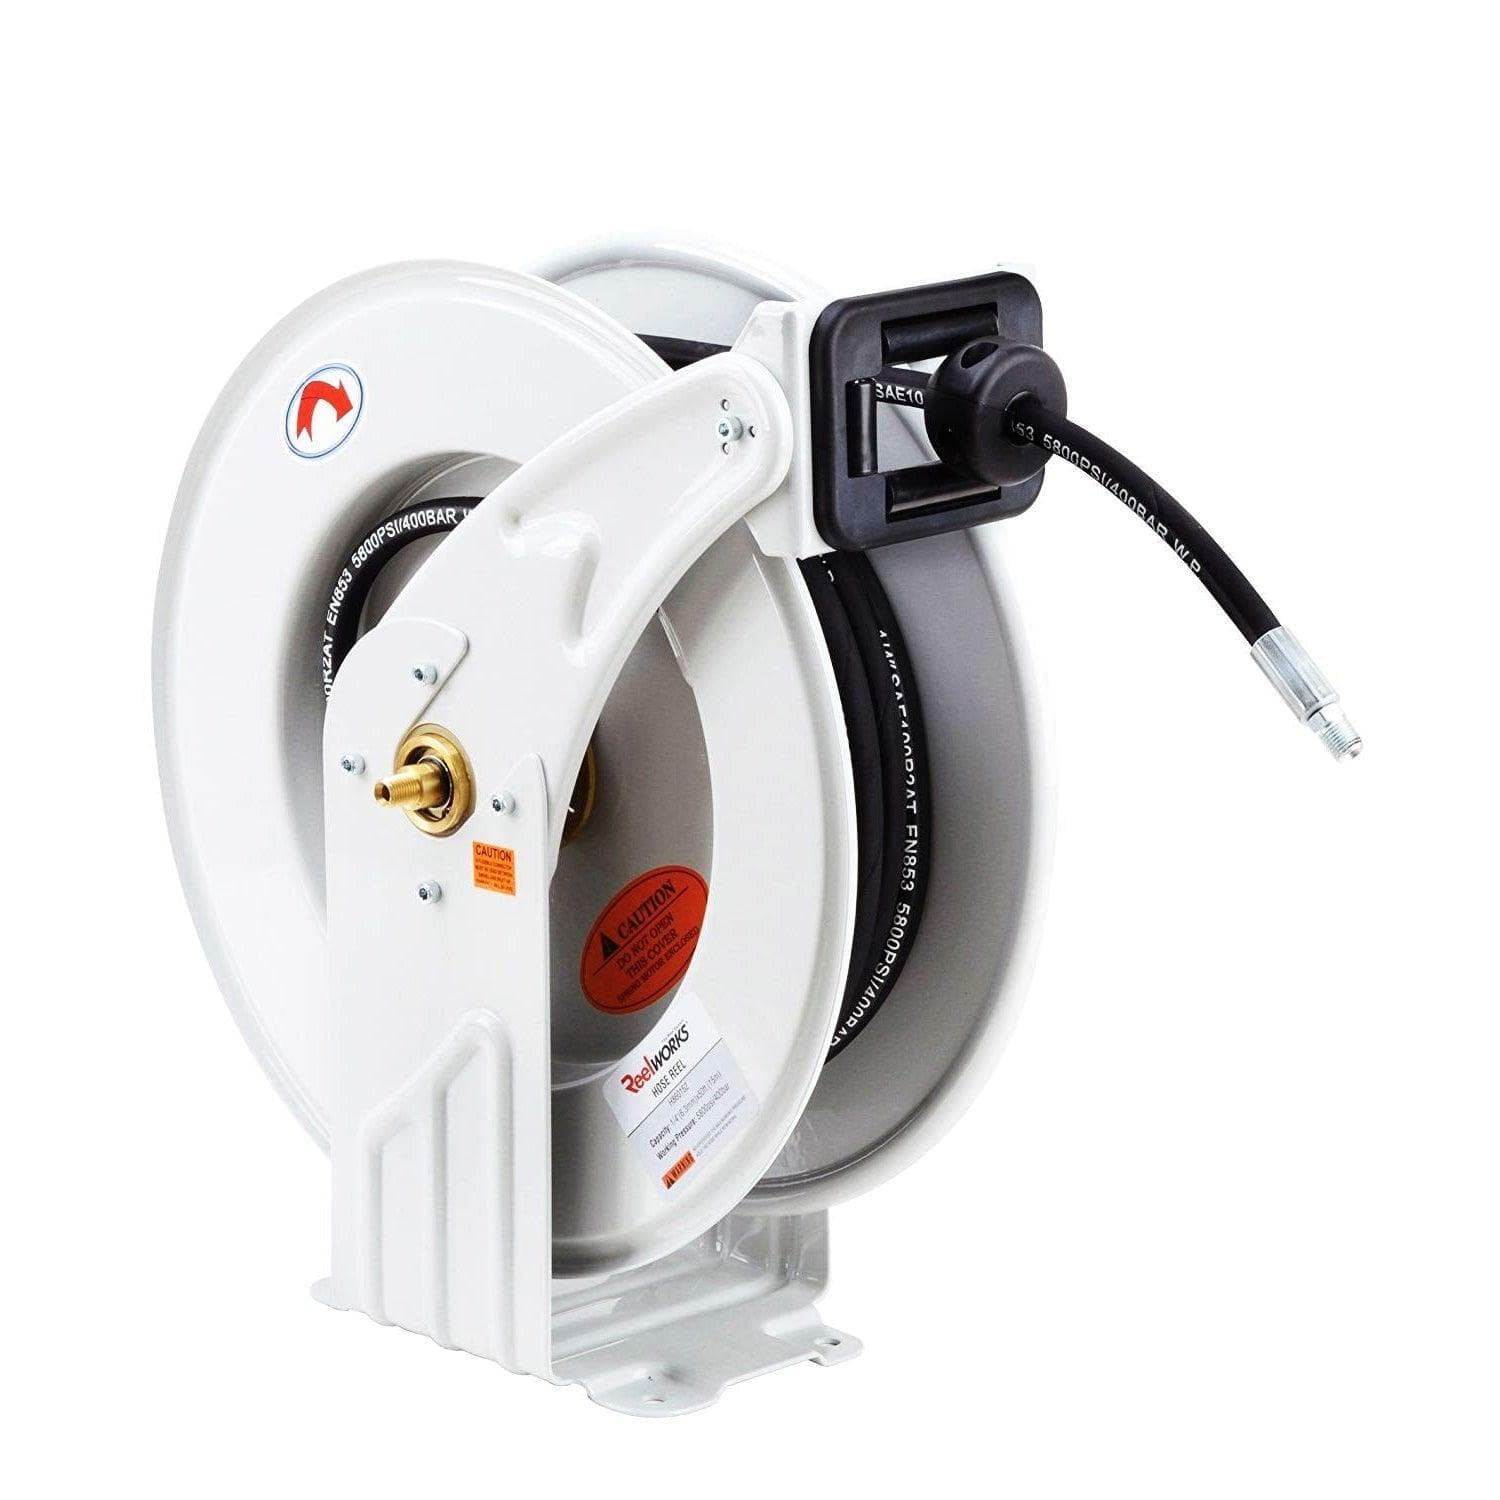 Performance Plus 50 ft. X 3/8 inch retractable Air Hose Reel with